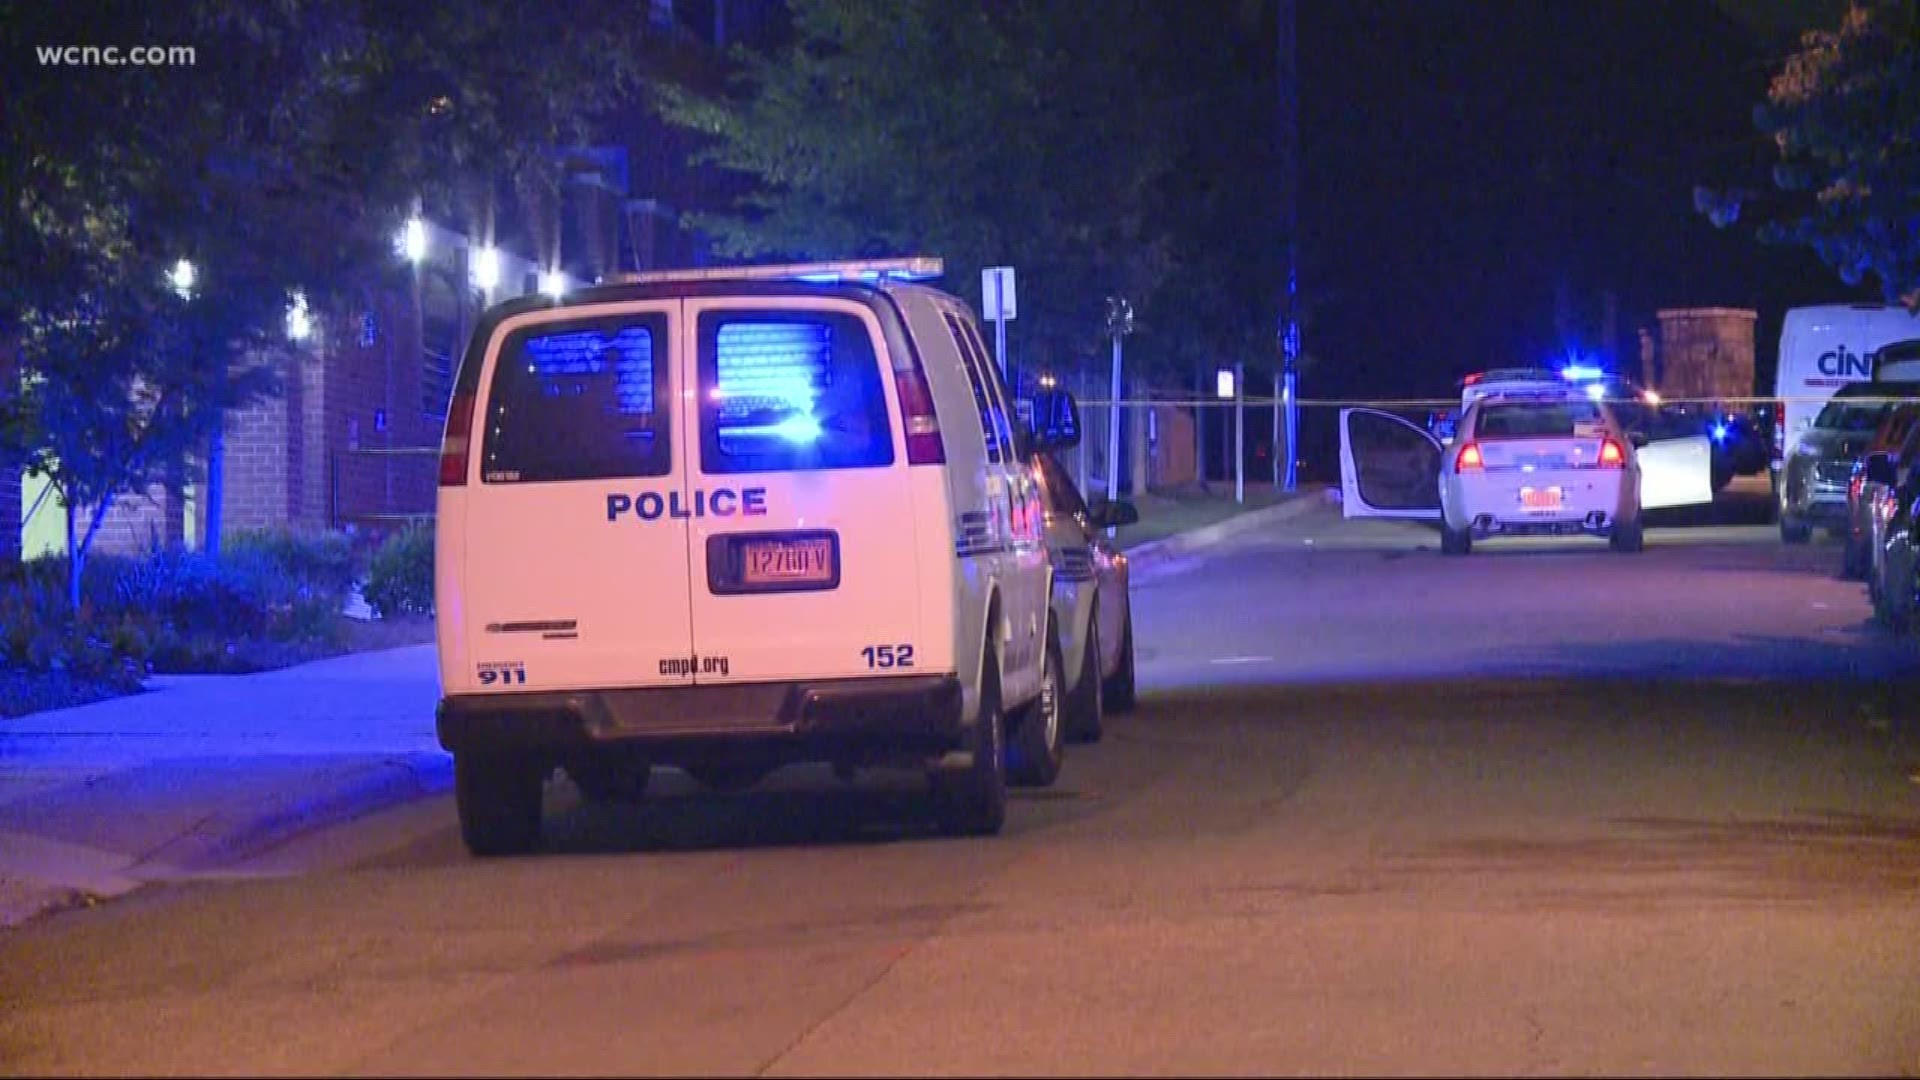 One person was taken to the hospital after being shot on Cedar Street in uptown Charlotte.